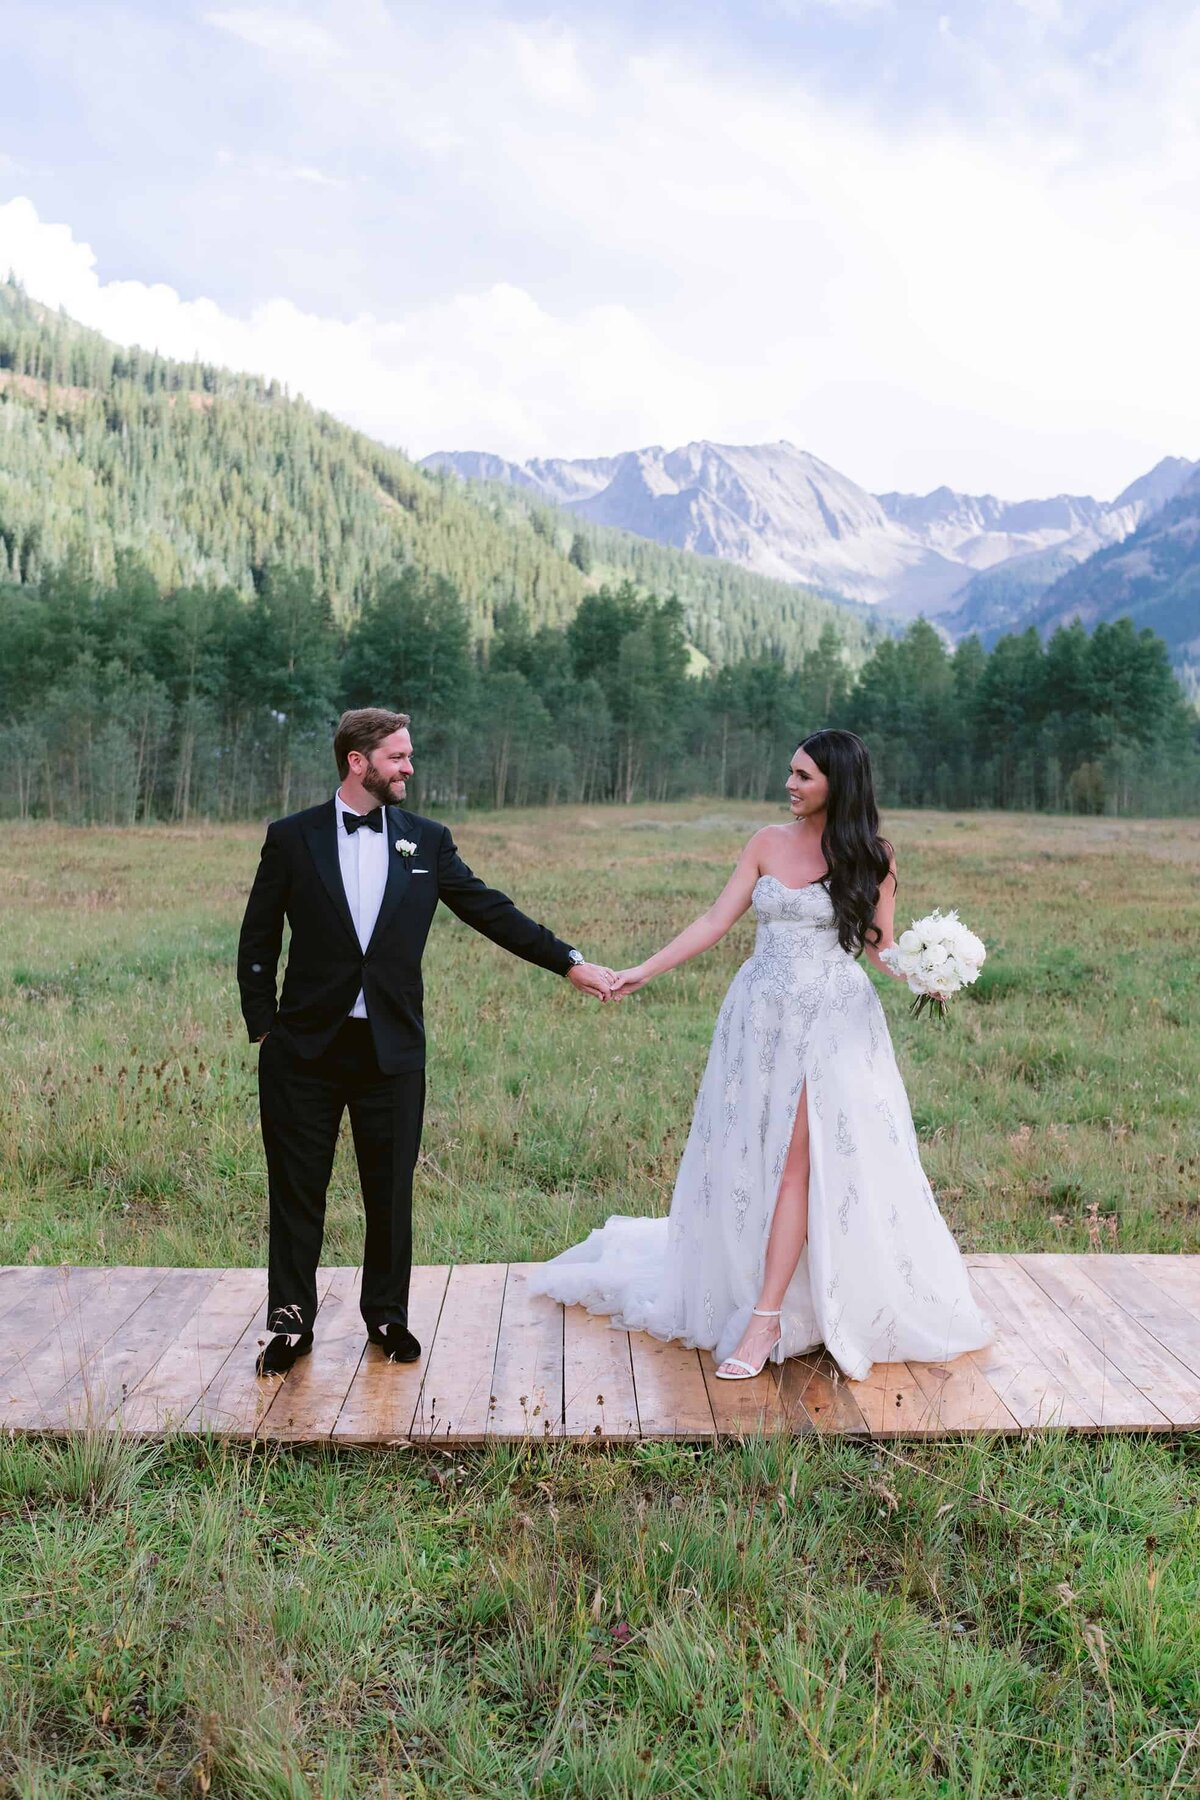 Bride and groom holding hands in front of mountains